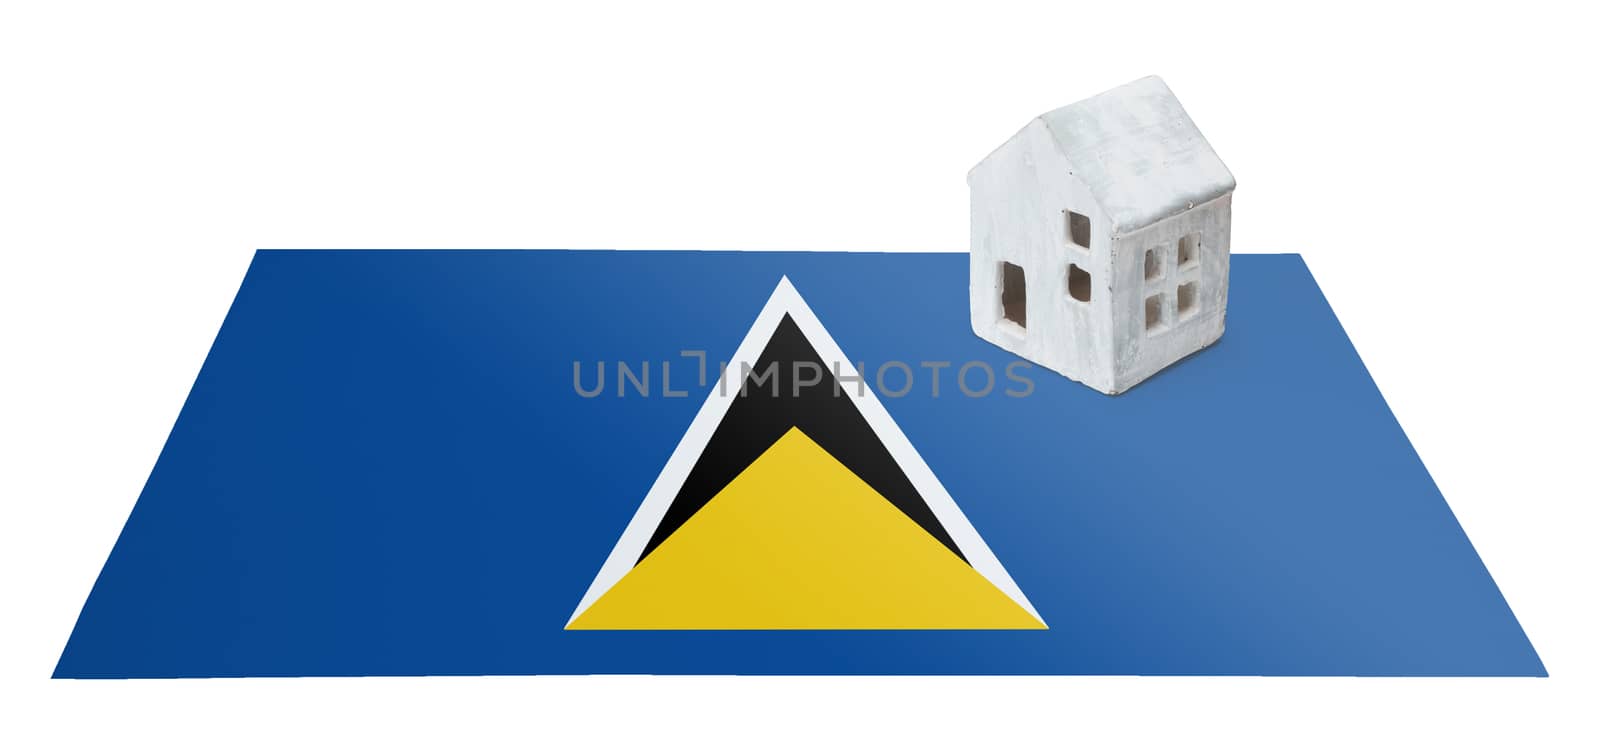 Small house on a flag - Saint Lucia by michaklootwijk